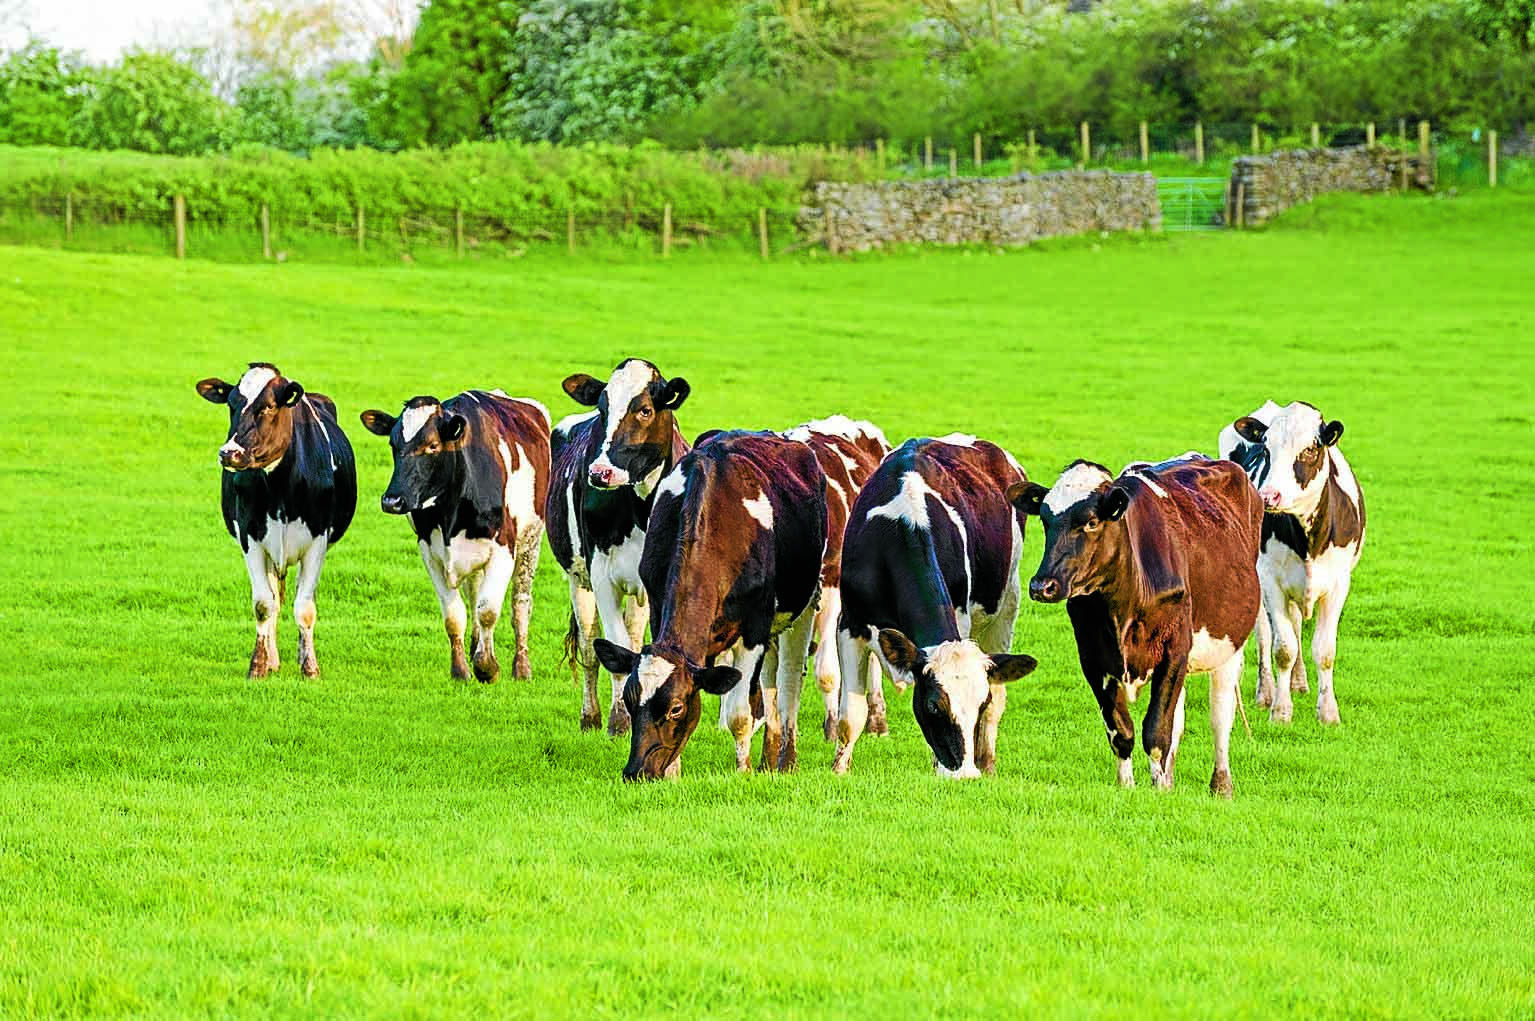 Milking the eco benefits of private investment